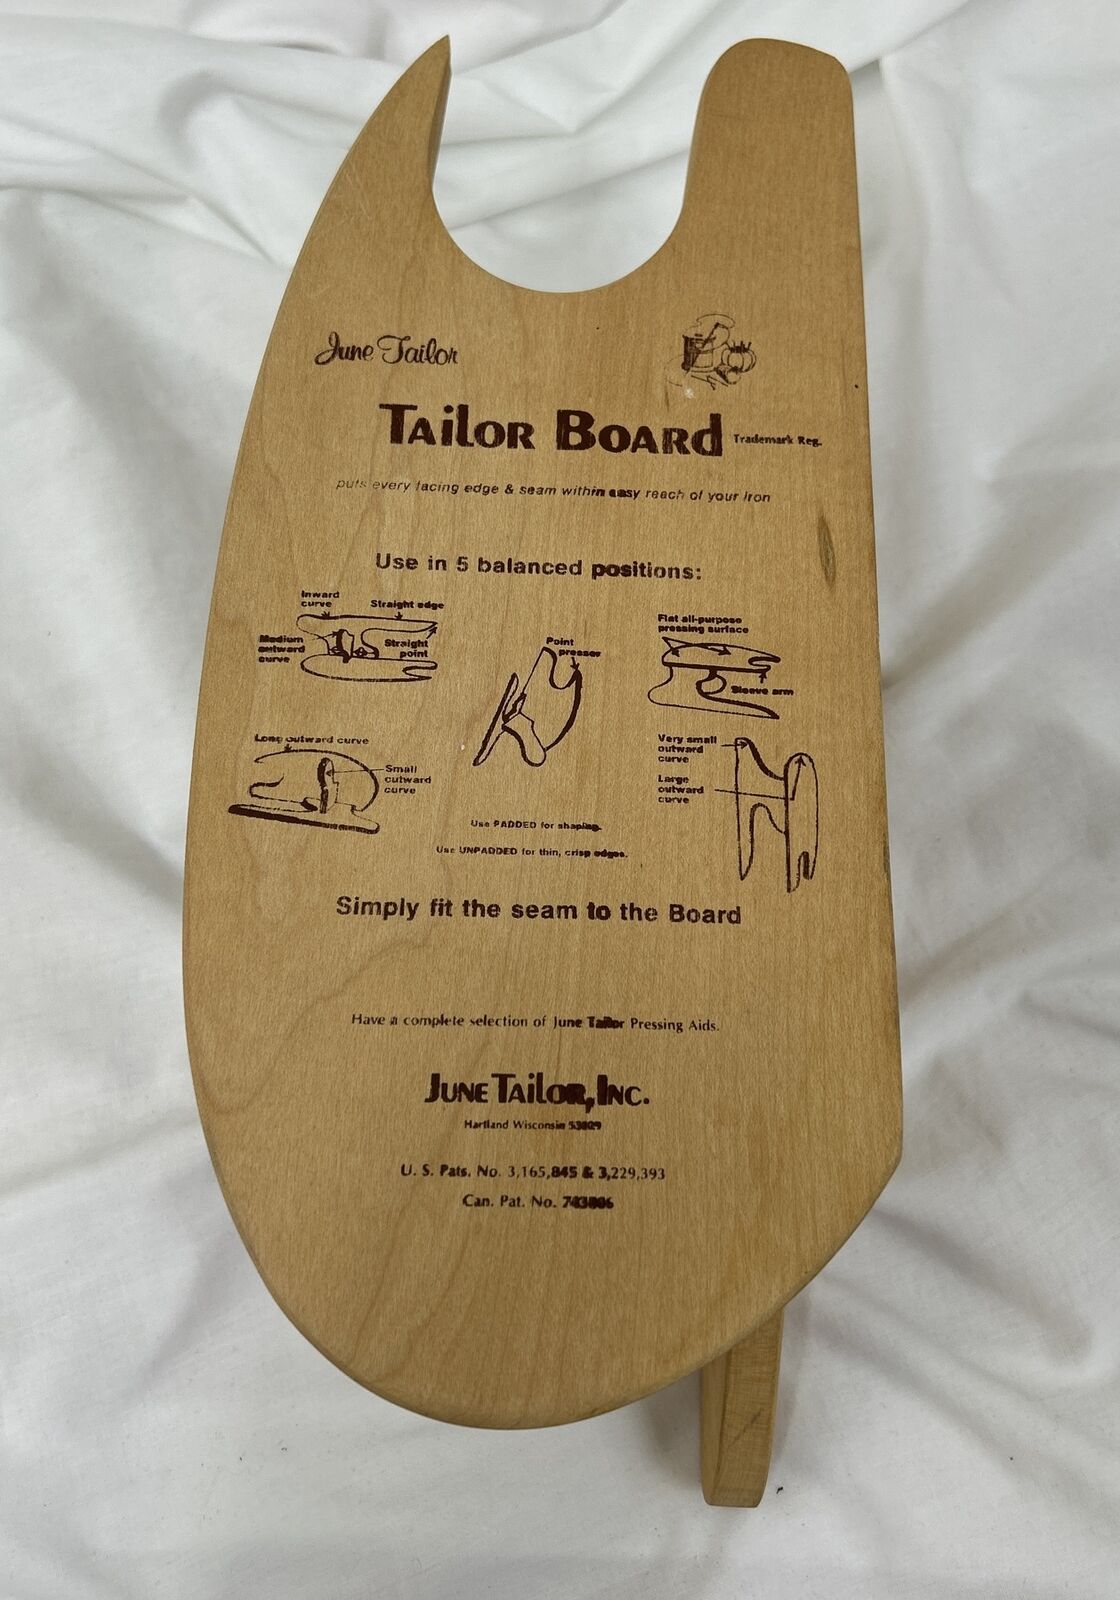 June Tailor Tailor Board Wood Seamstress Ironing Seam Press Sewing Tools Vintage